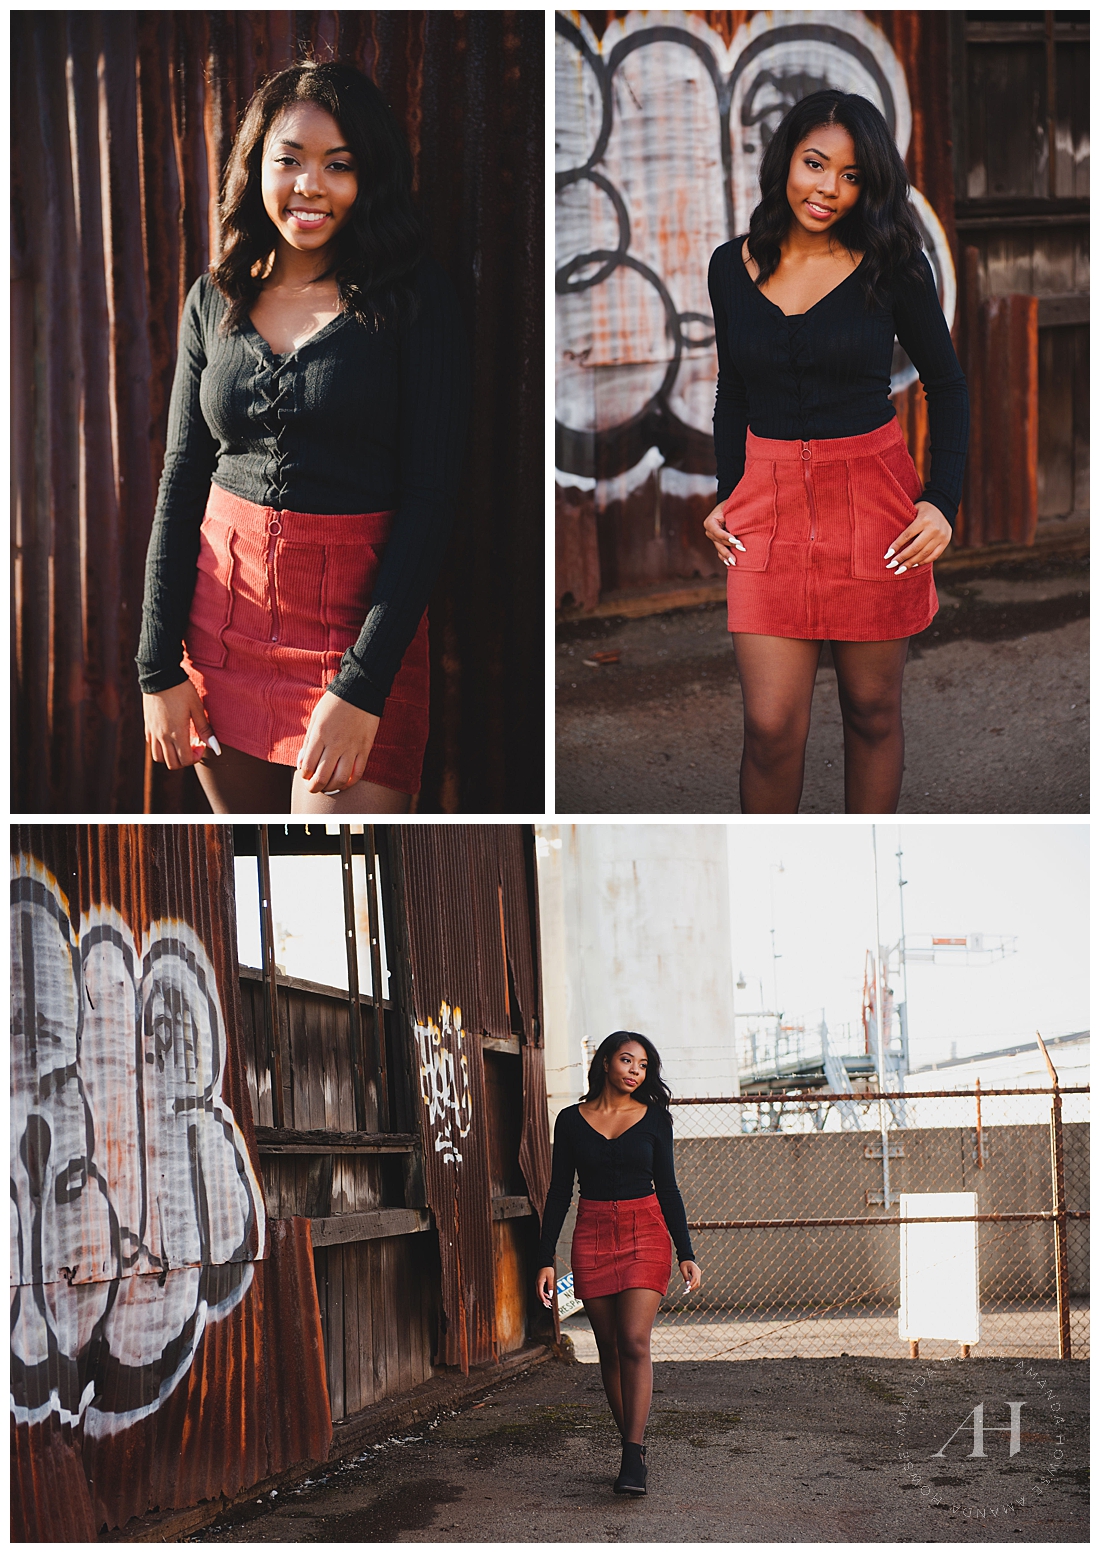 Urban Senior Portraits with Graffiti | Modern Outfits for Senior Portraits | Photographed by Tacoma Senior Photographer Amanda Howse Photography